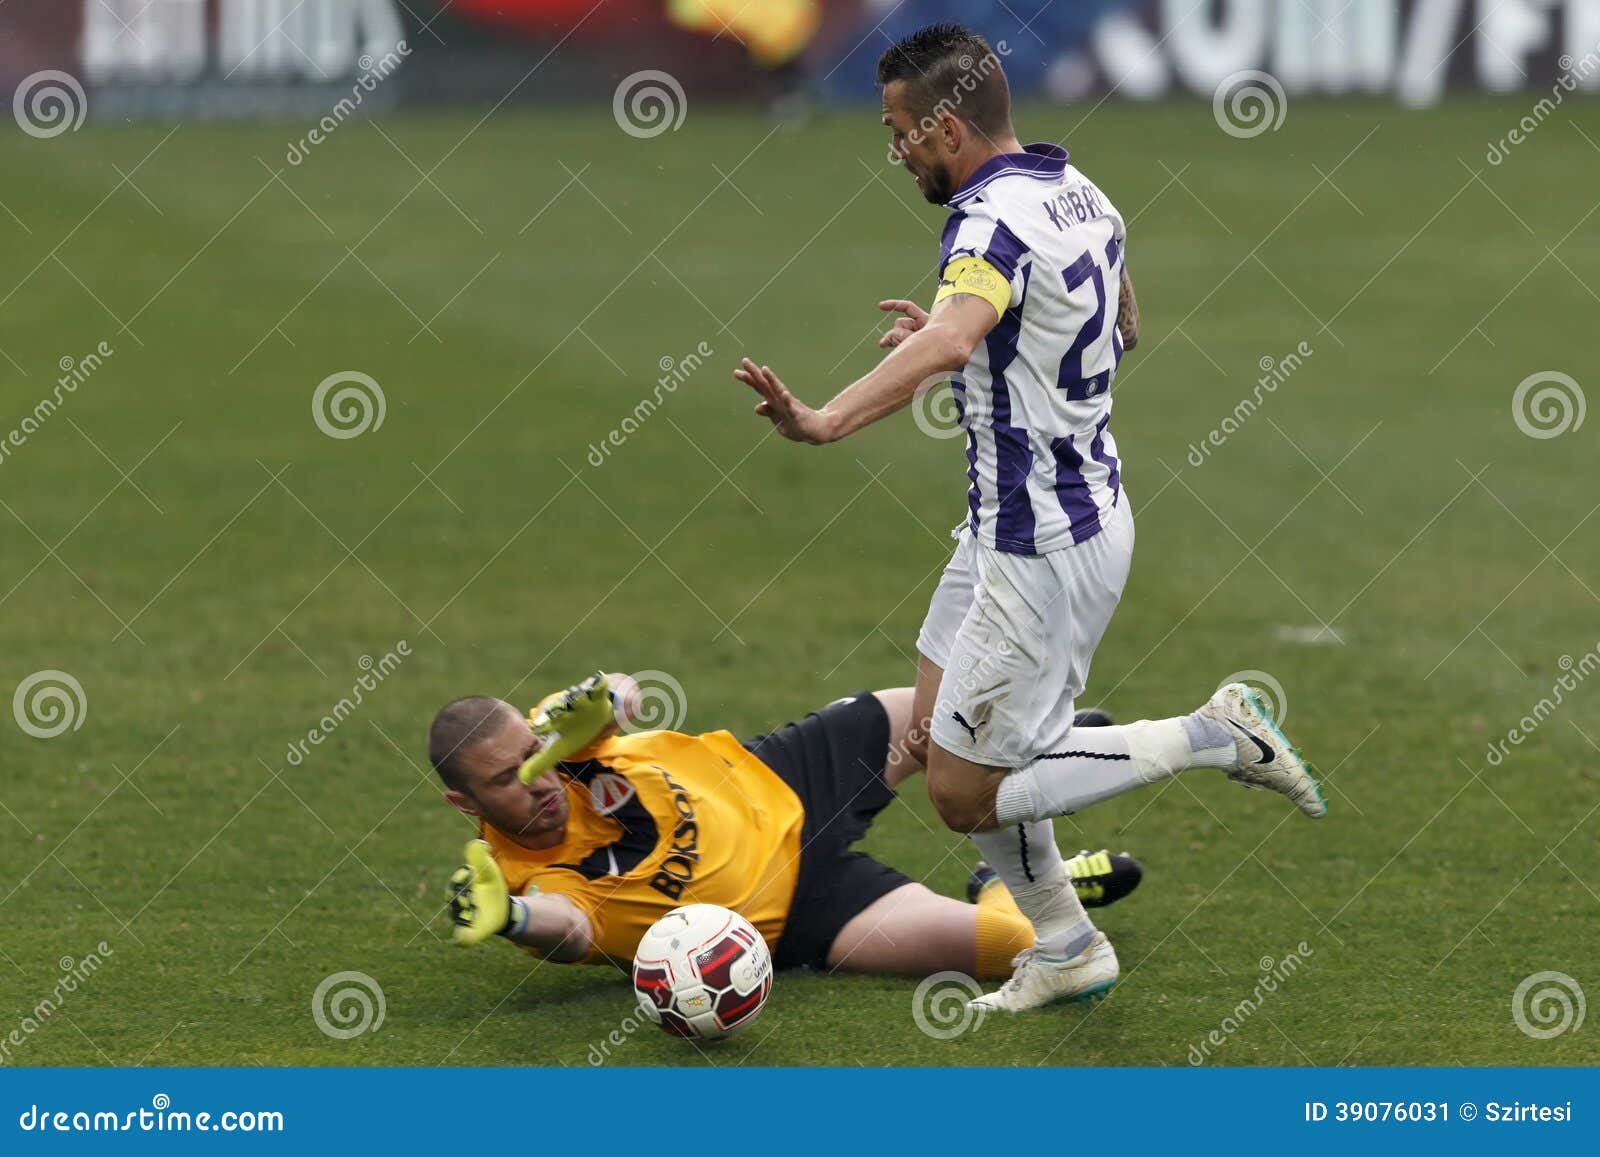 BUDAPEST - March 10: Peter Kabat Of UTE With The Ball During